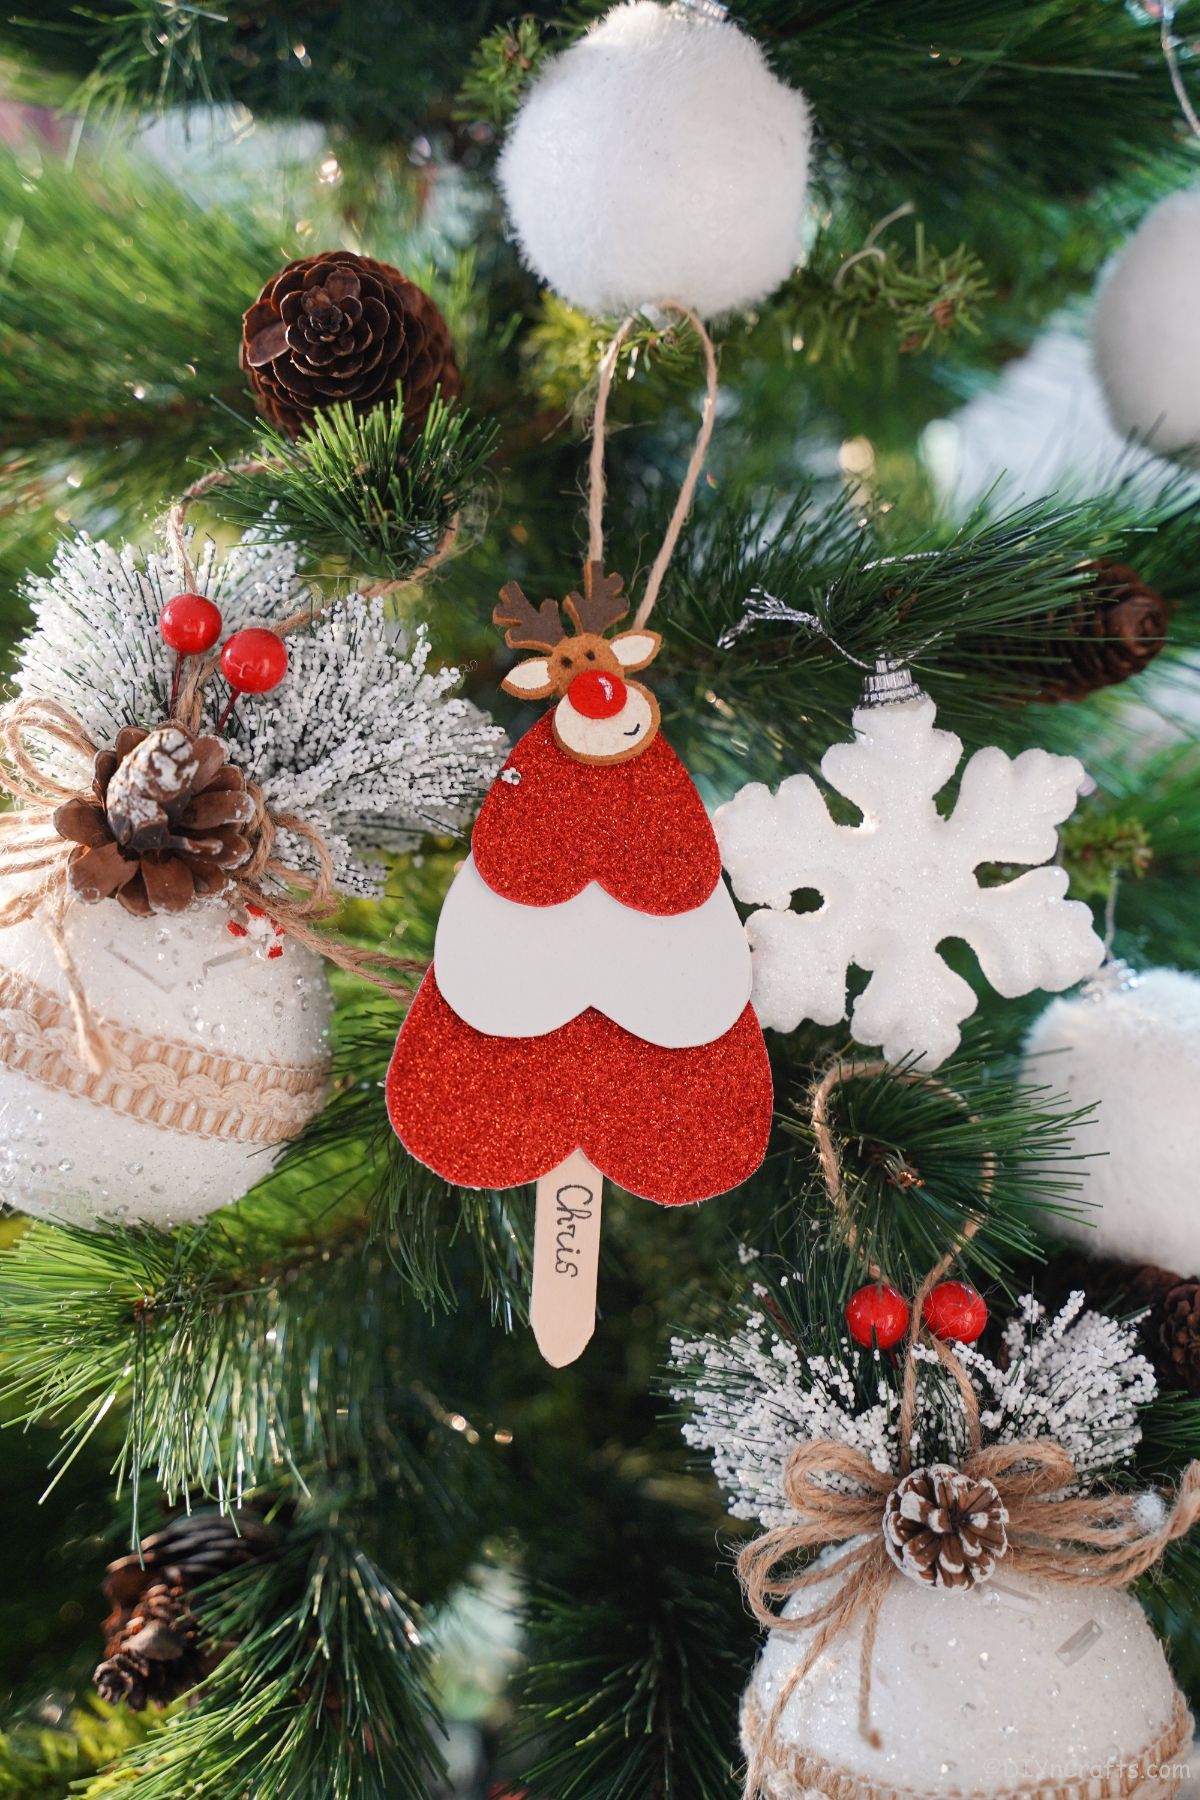 miniature red and white tree shaped christmas ornament hanging on tree by white snowflake ornament